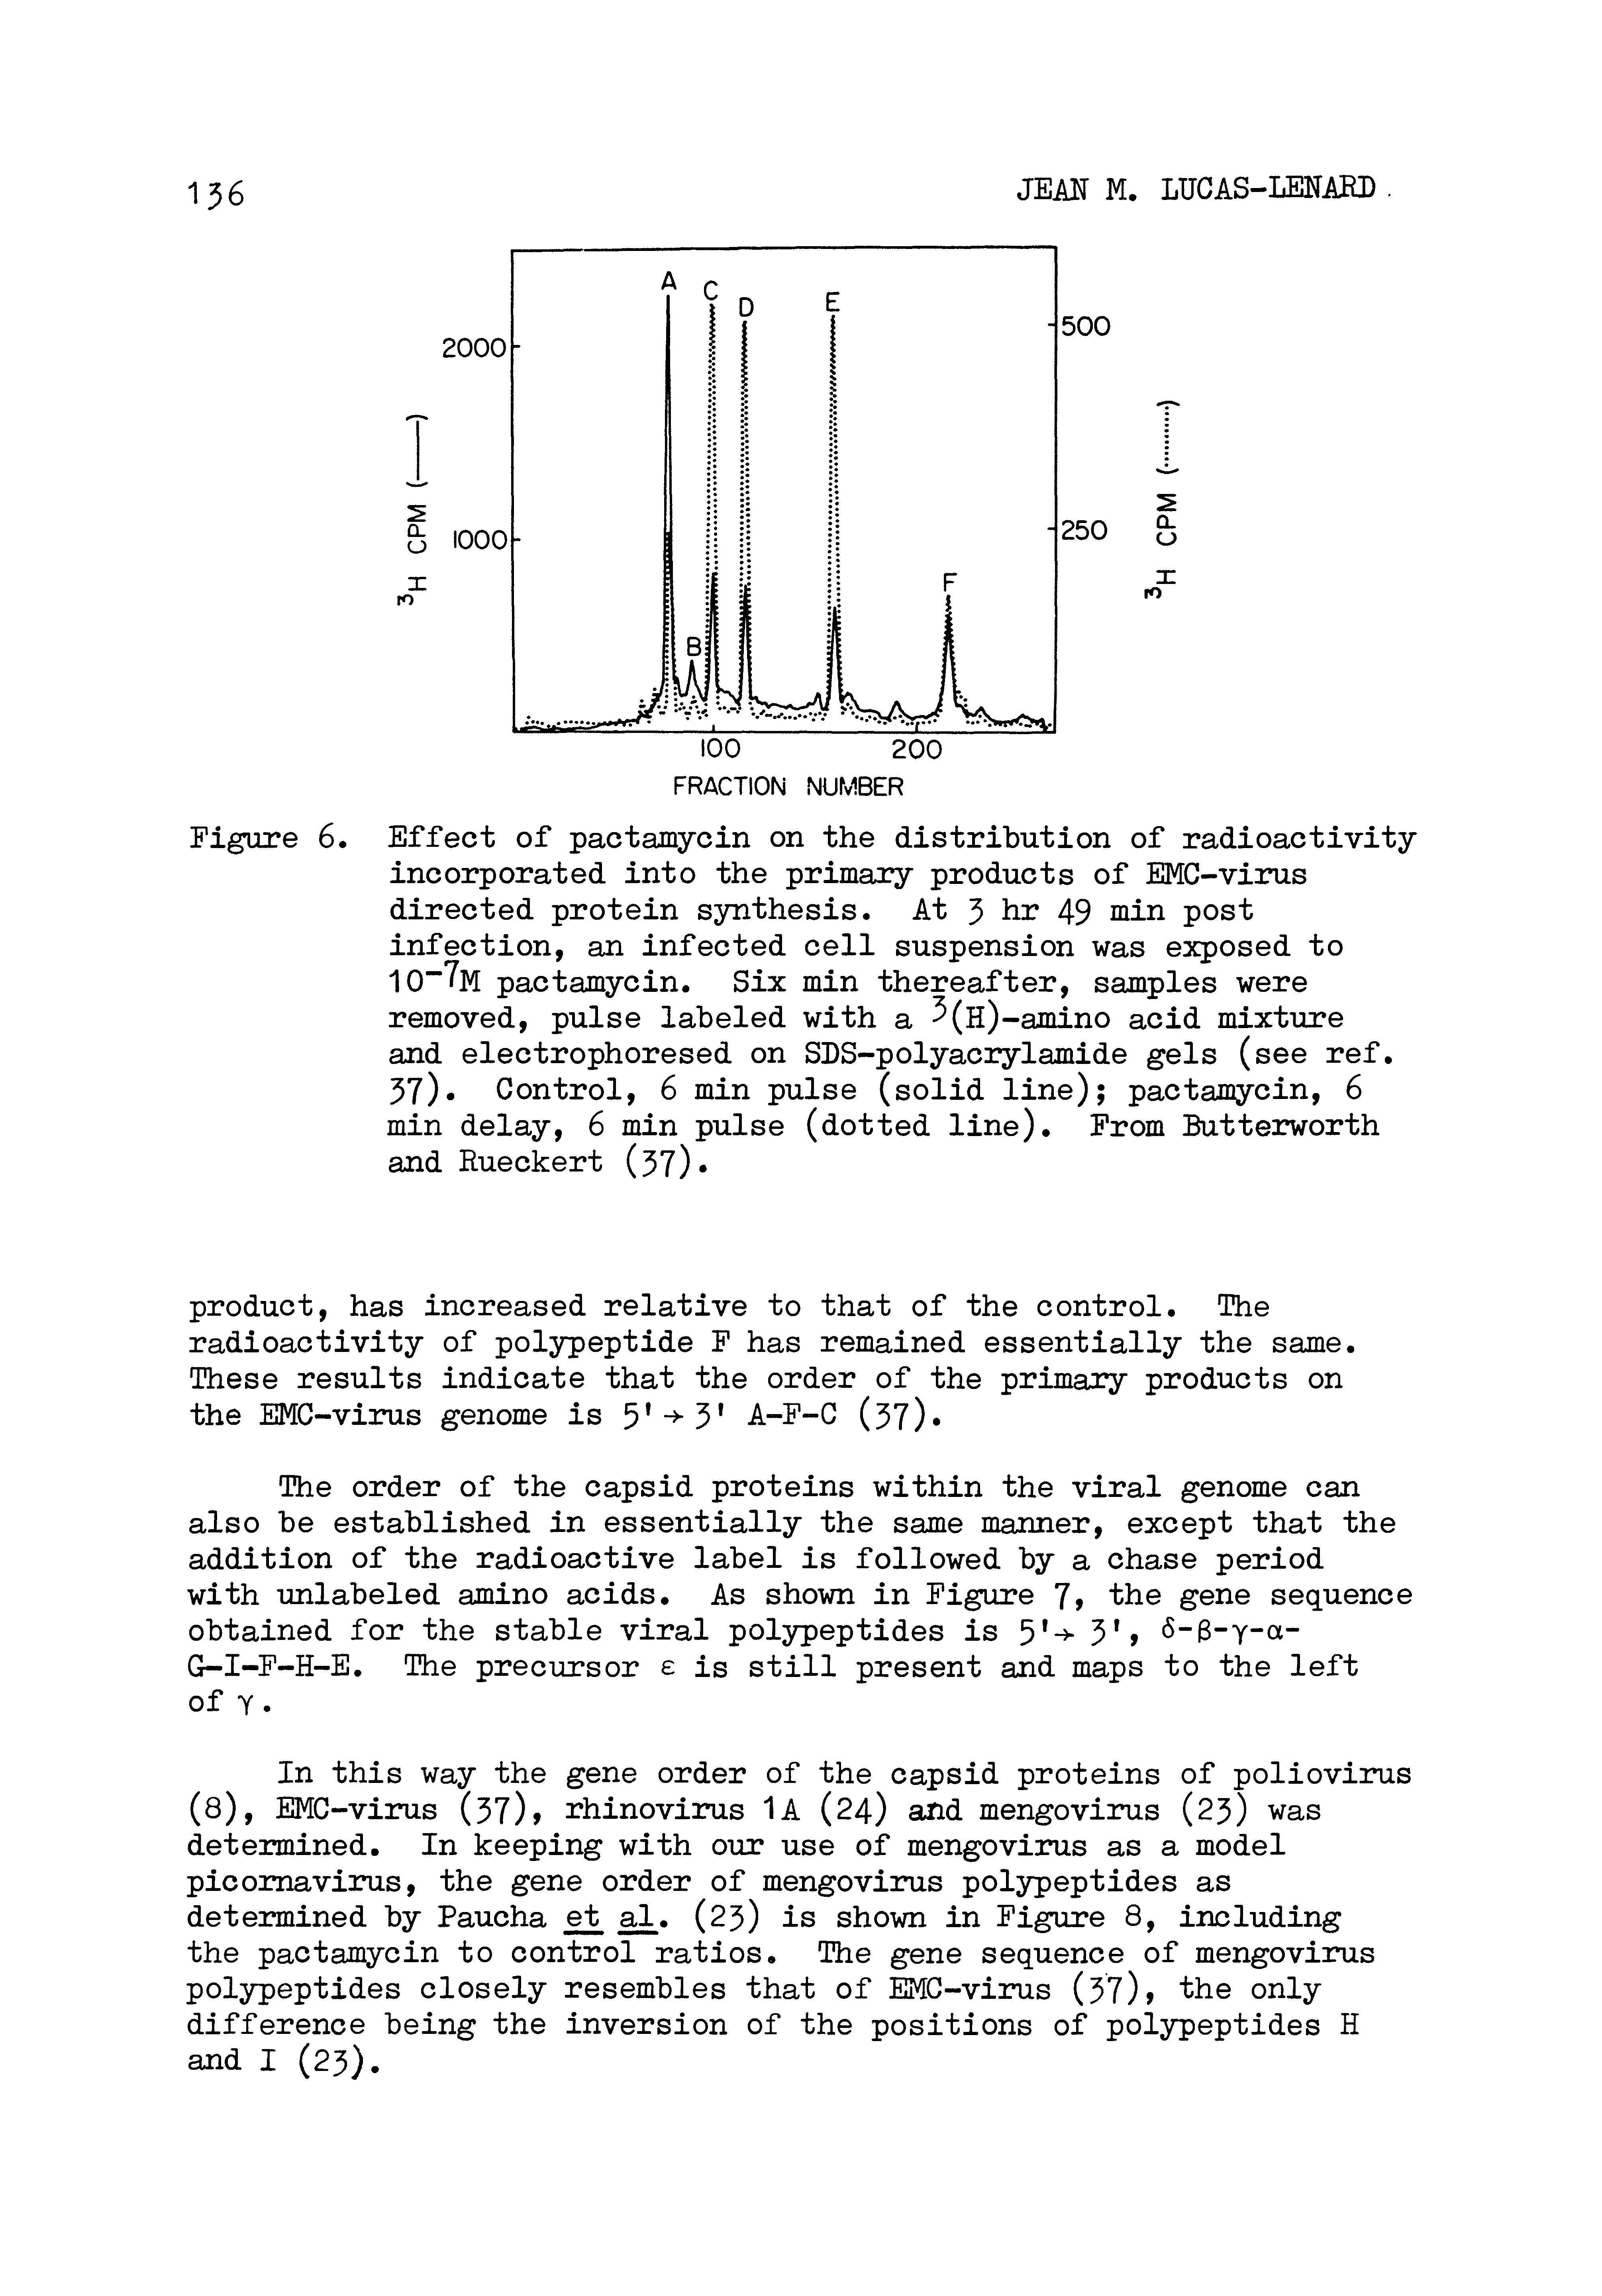 Figure 6. Effect of pactamycin on the distribution of radioactivity incorporated into the primary products of EMC-virus directed protein synthesis. At 5 iu 49 niin post infection, an infected cell suspension was exposed to pactamycin. Six min thereafter, samples were removed, pulse labeled with a (h)-amino acid mixture and electrophoresed on SDS-polyaciylamide gels (see ref. 57) Control, 6 min pulse (solid line) pactamycin, 6 min delay, 6 min pulse (dotted line). From Butterworth and Rueckert (57) ...